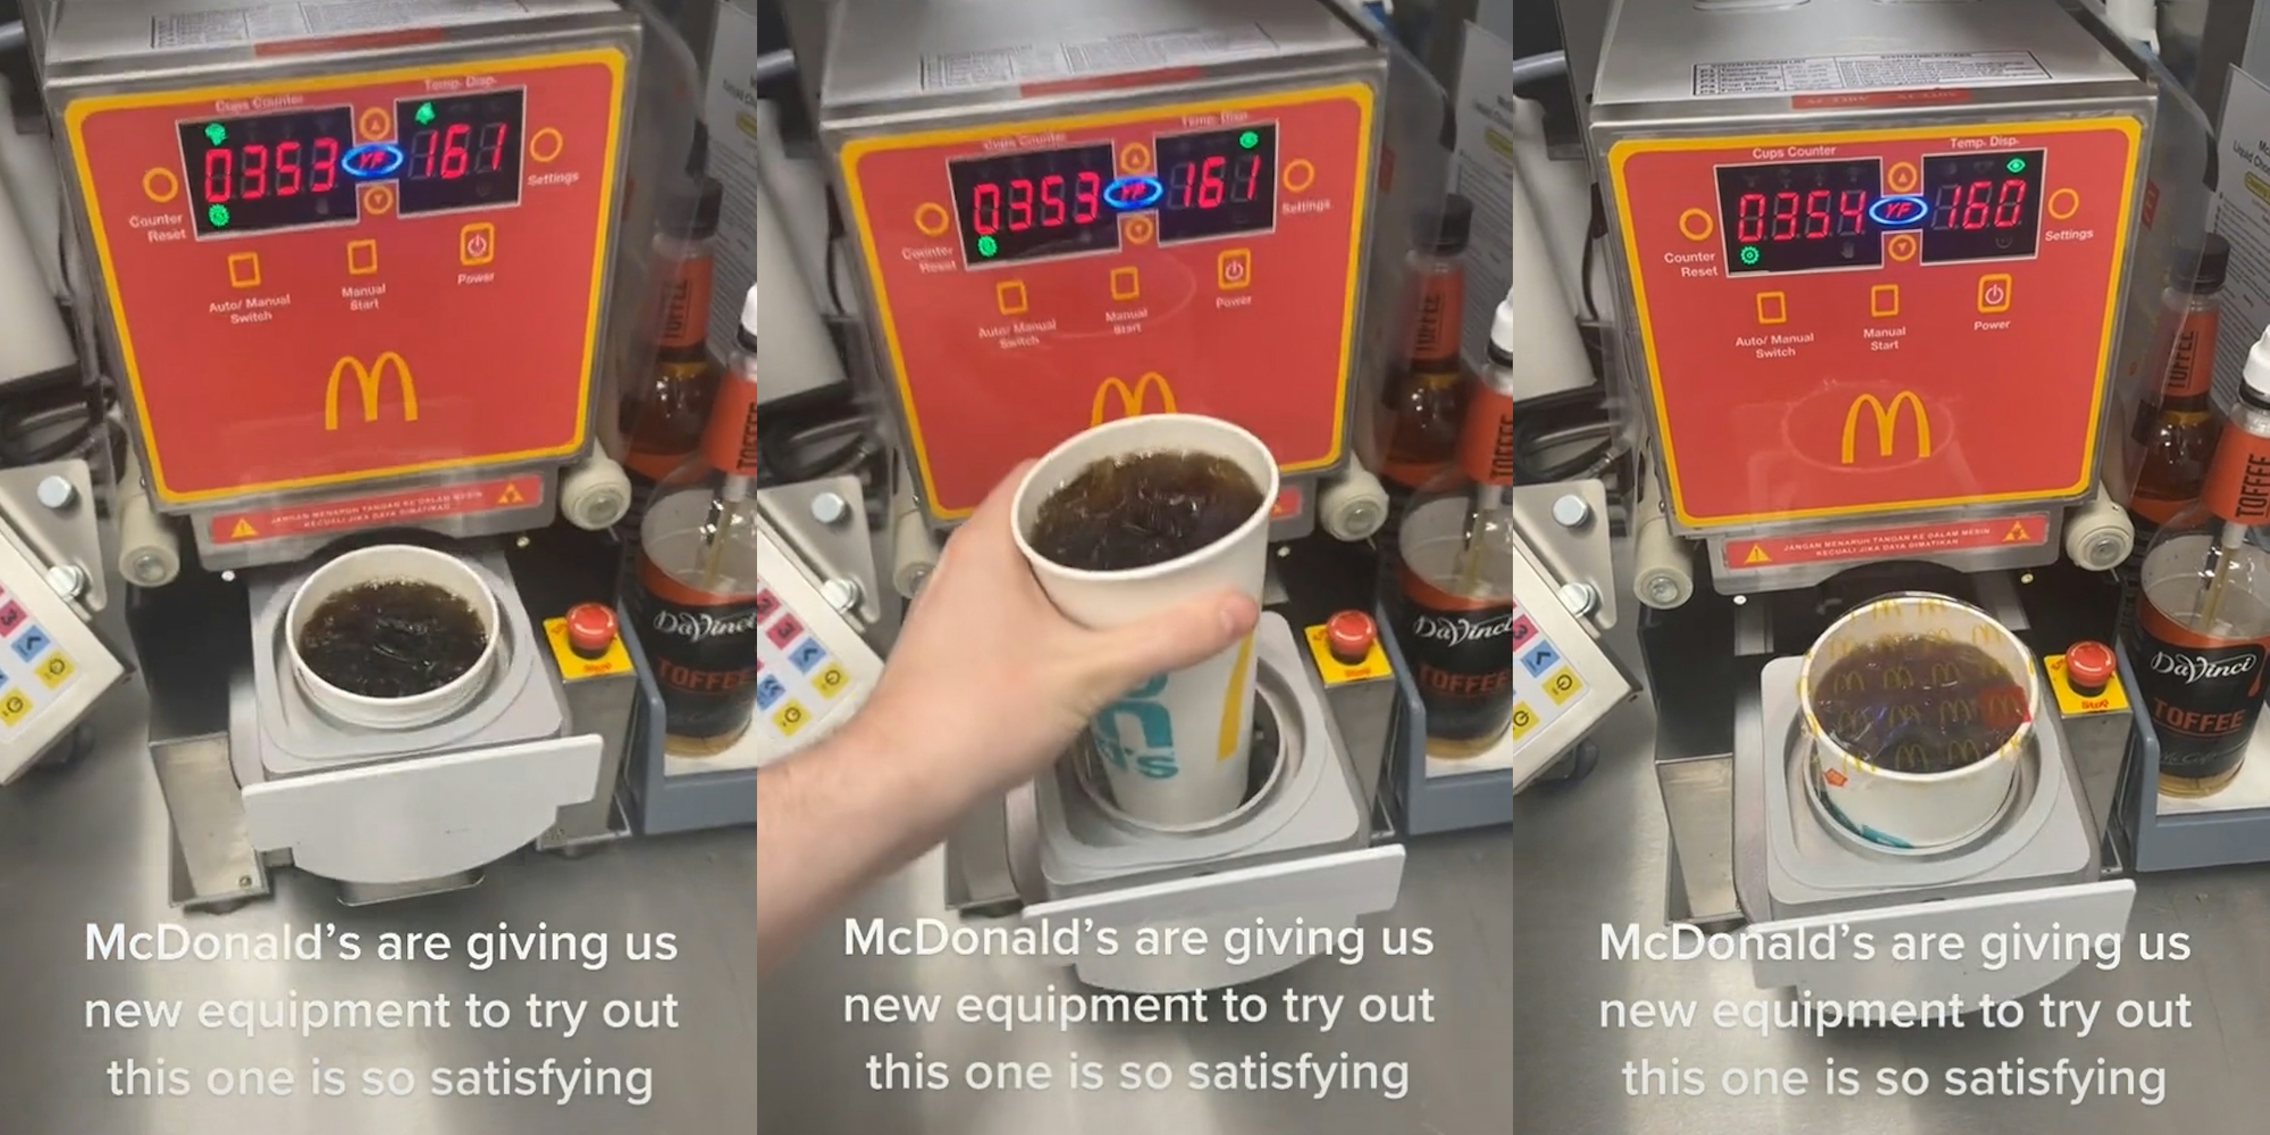 McDonald's new cup sealer with drink in it caption 'McDonald's are giving us new equipment to try out this one is so satisfying' (l) McDonald's new cup sealer with employee loading drink caption 'McDonald's are giving us new equipment to try out this one is so satisfying' (c) Mcdonald's new drink sealer with finished sealed drink in it caption 'McDonald's are giving us new equipment to try out this one is so satisfying' (r)